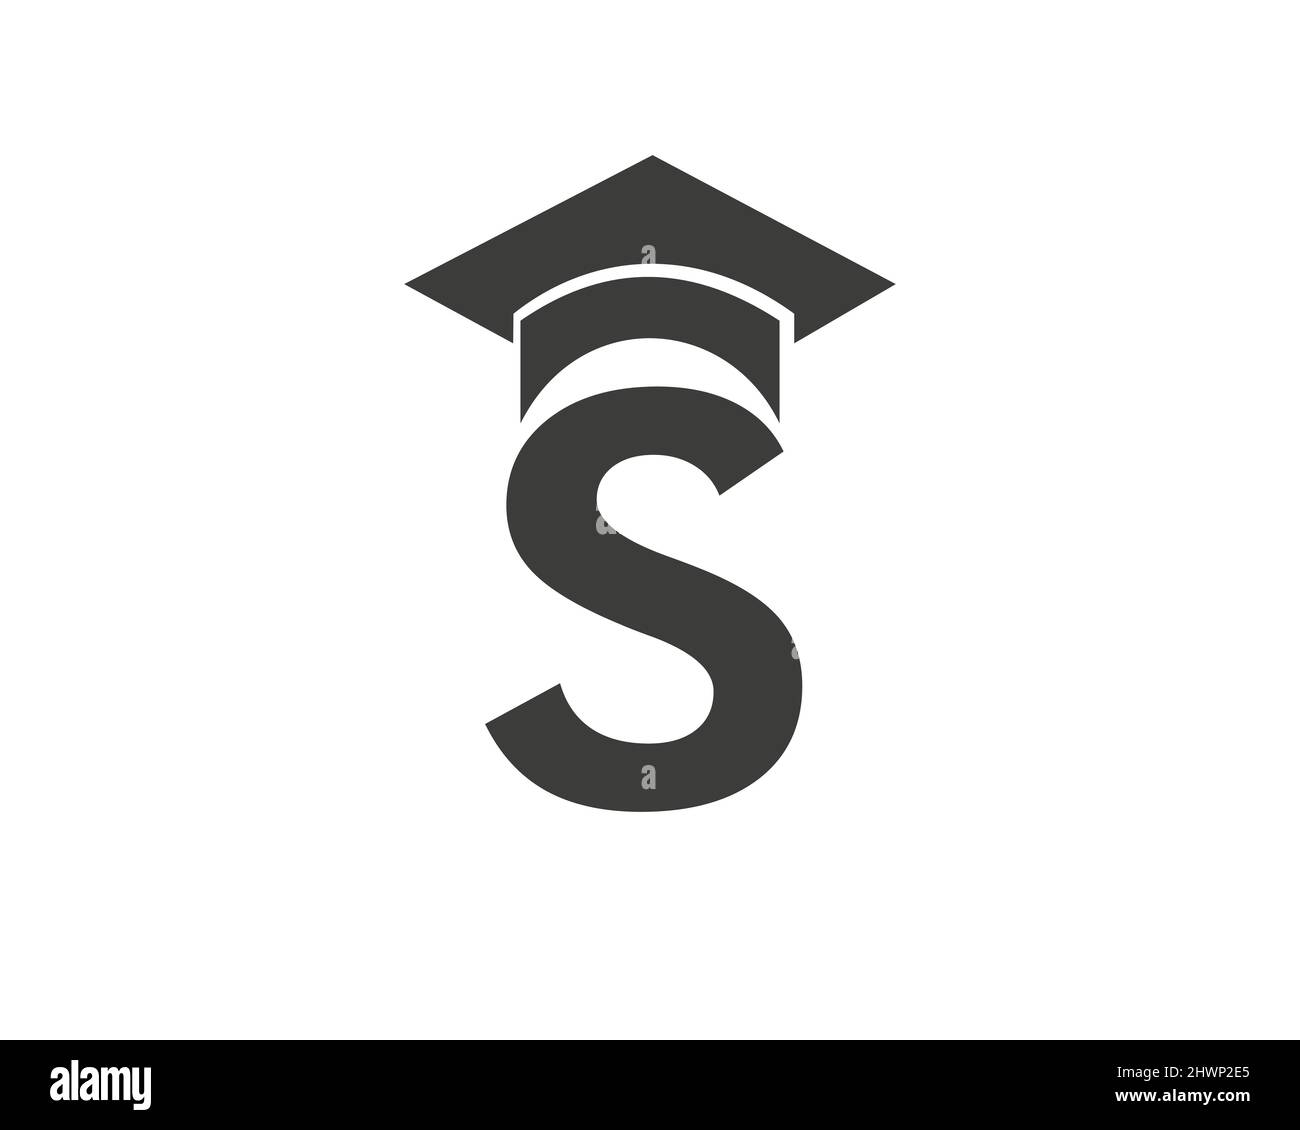 Letter S Education Logo Template. Education Logo On S Letter, Initial Education Hat Concept Template Stock Vector